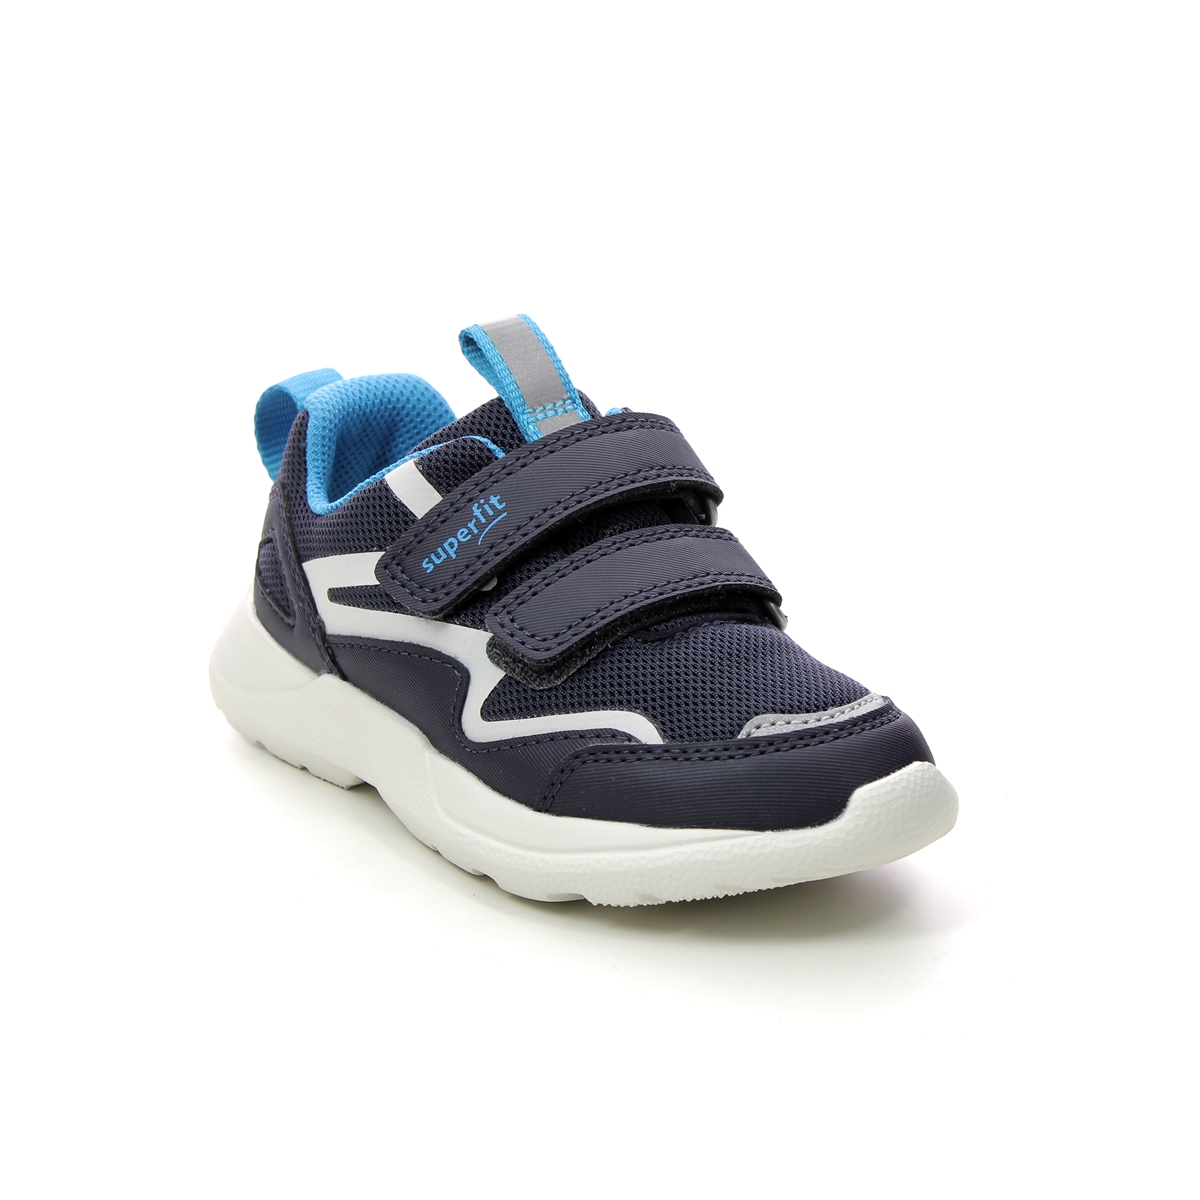 Superfit Rush Mini Navy Kids Trainers 1006206-8000 In Size 23 In Plain Navy For kids